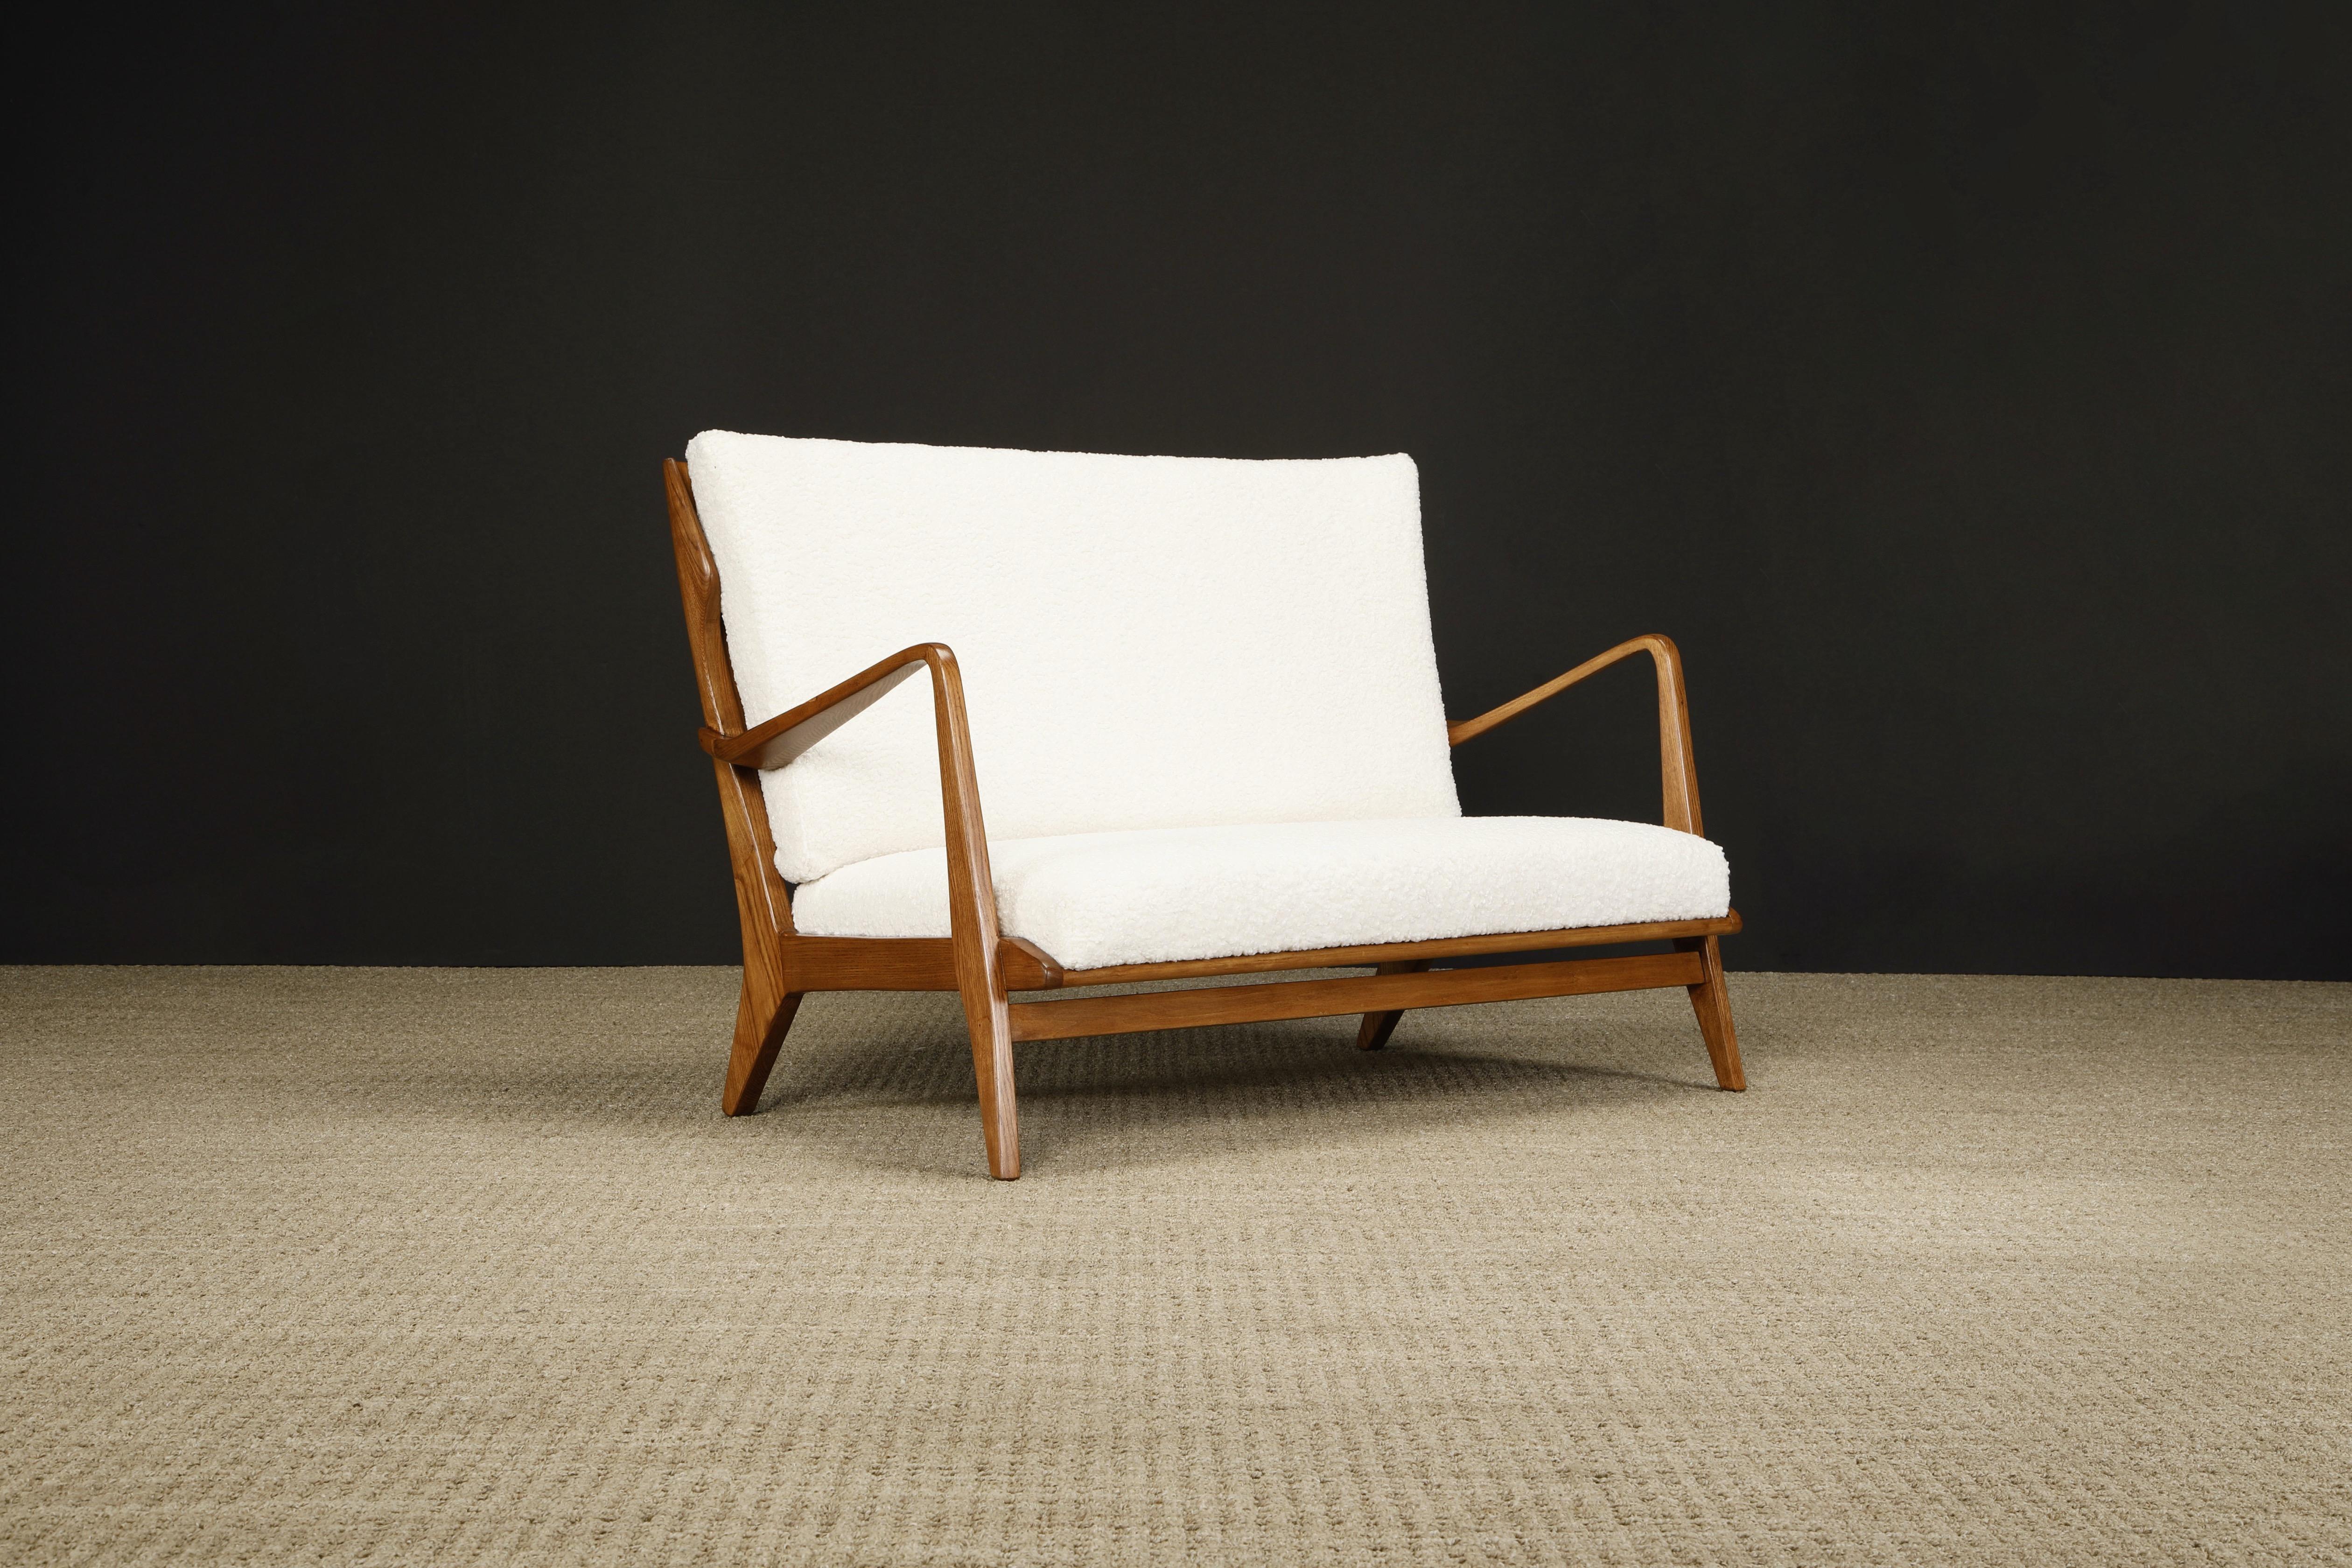 An exceptionally rare and coveted settee by Gio Ponti for Cassina, circa 1950s, with reupholstered white bouclé fabric cushions, refinished elm frames with incredible wood grain, signature slatted backs and sculptured arms. 

Such an important